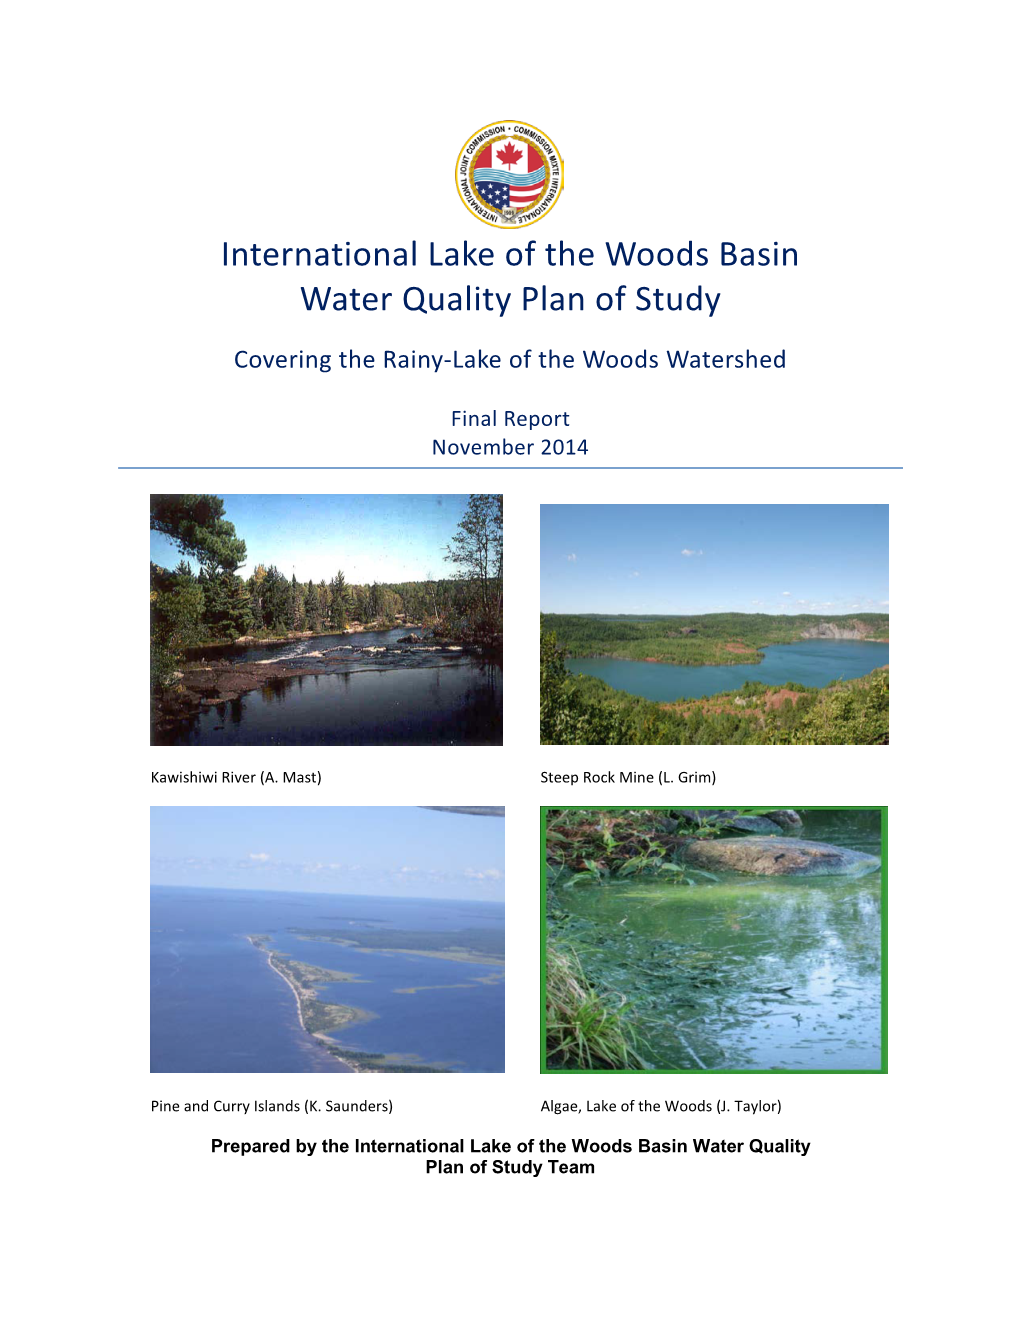 International Lake of the Woods Basin Water Quality Plan of Study